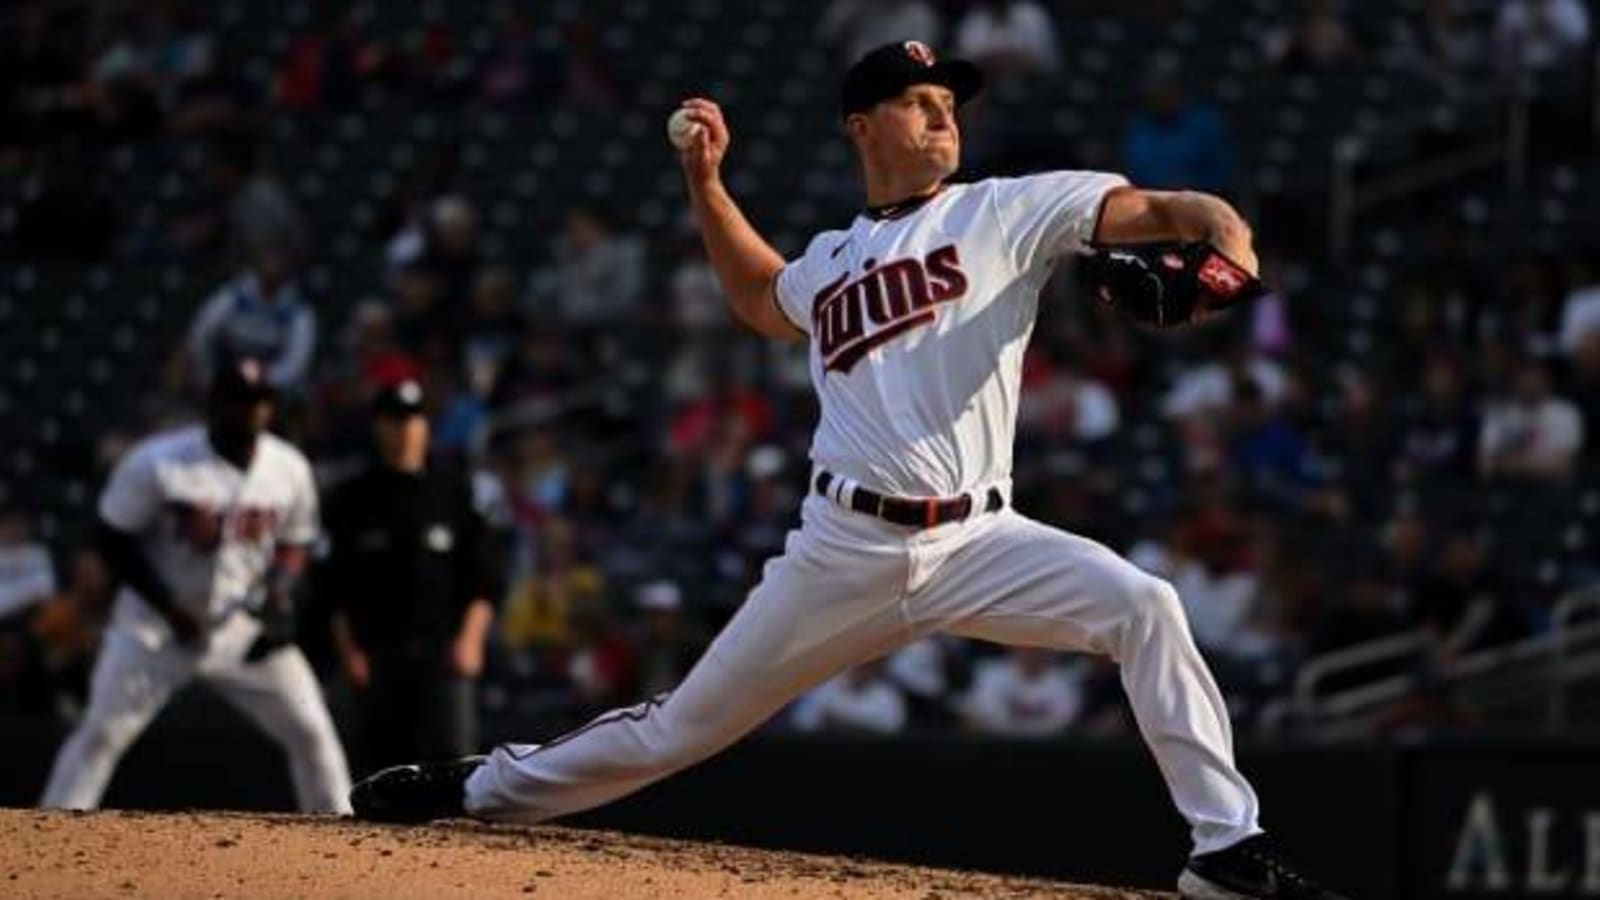  Giants re-sign former Twins reliever to minor-league deal